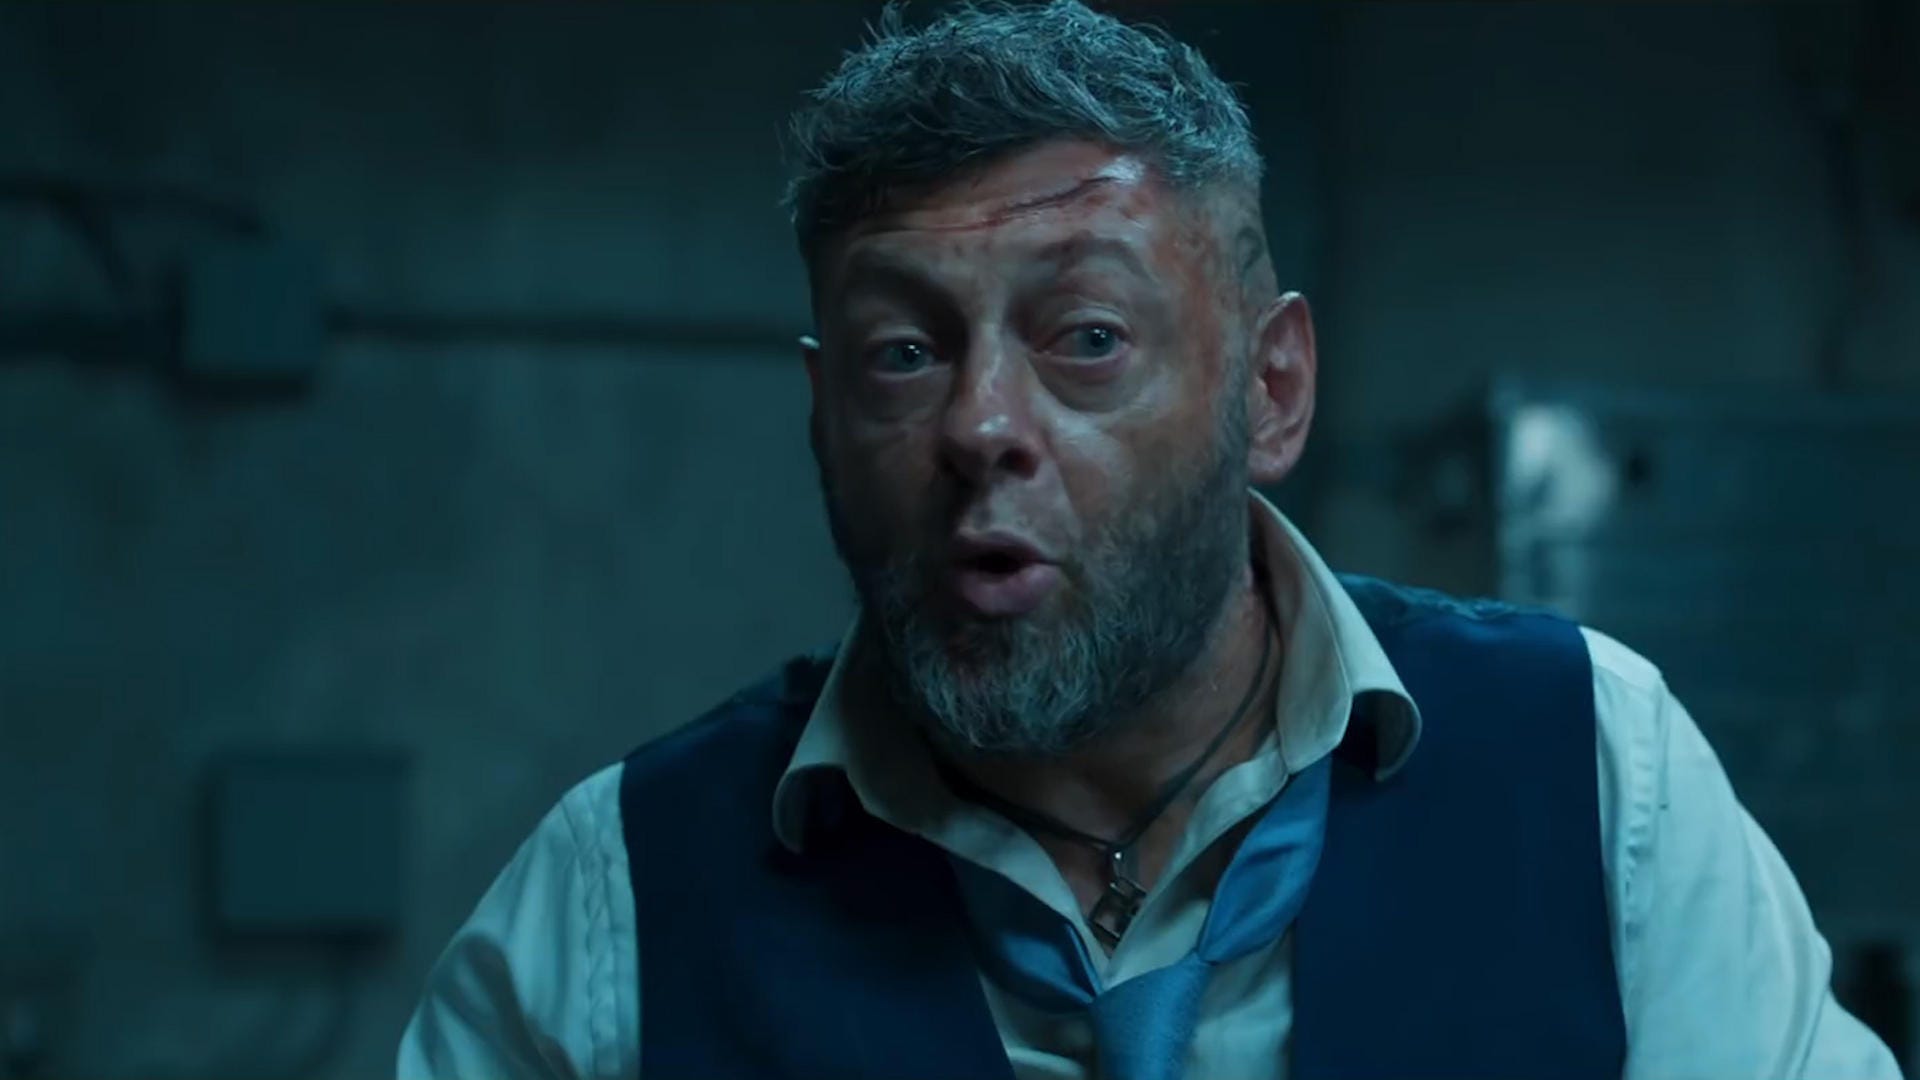 The Batman director confirms Andy Serkis as Alfred Pennyworth - CNET